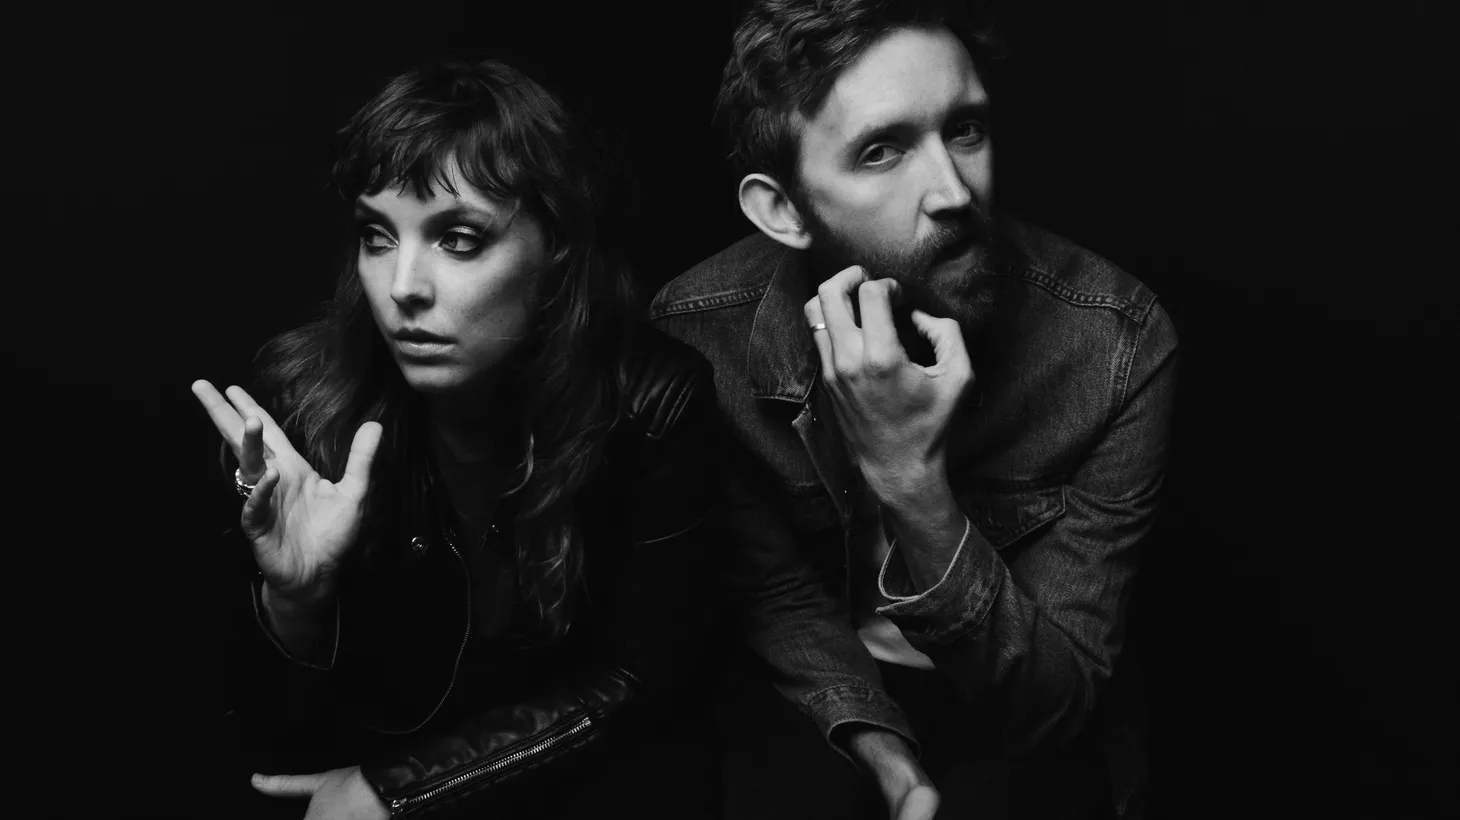 Sylvan Esso began as a chance meeting between two very different, but very talented musicians -- singer Amelia Meath and producer Nick Sanborn.